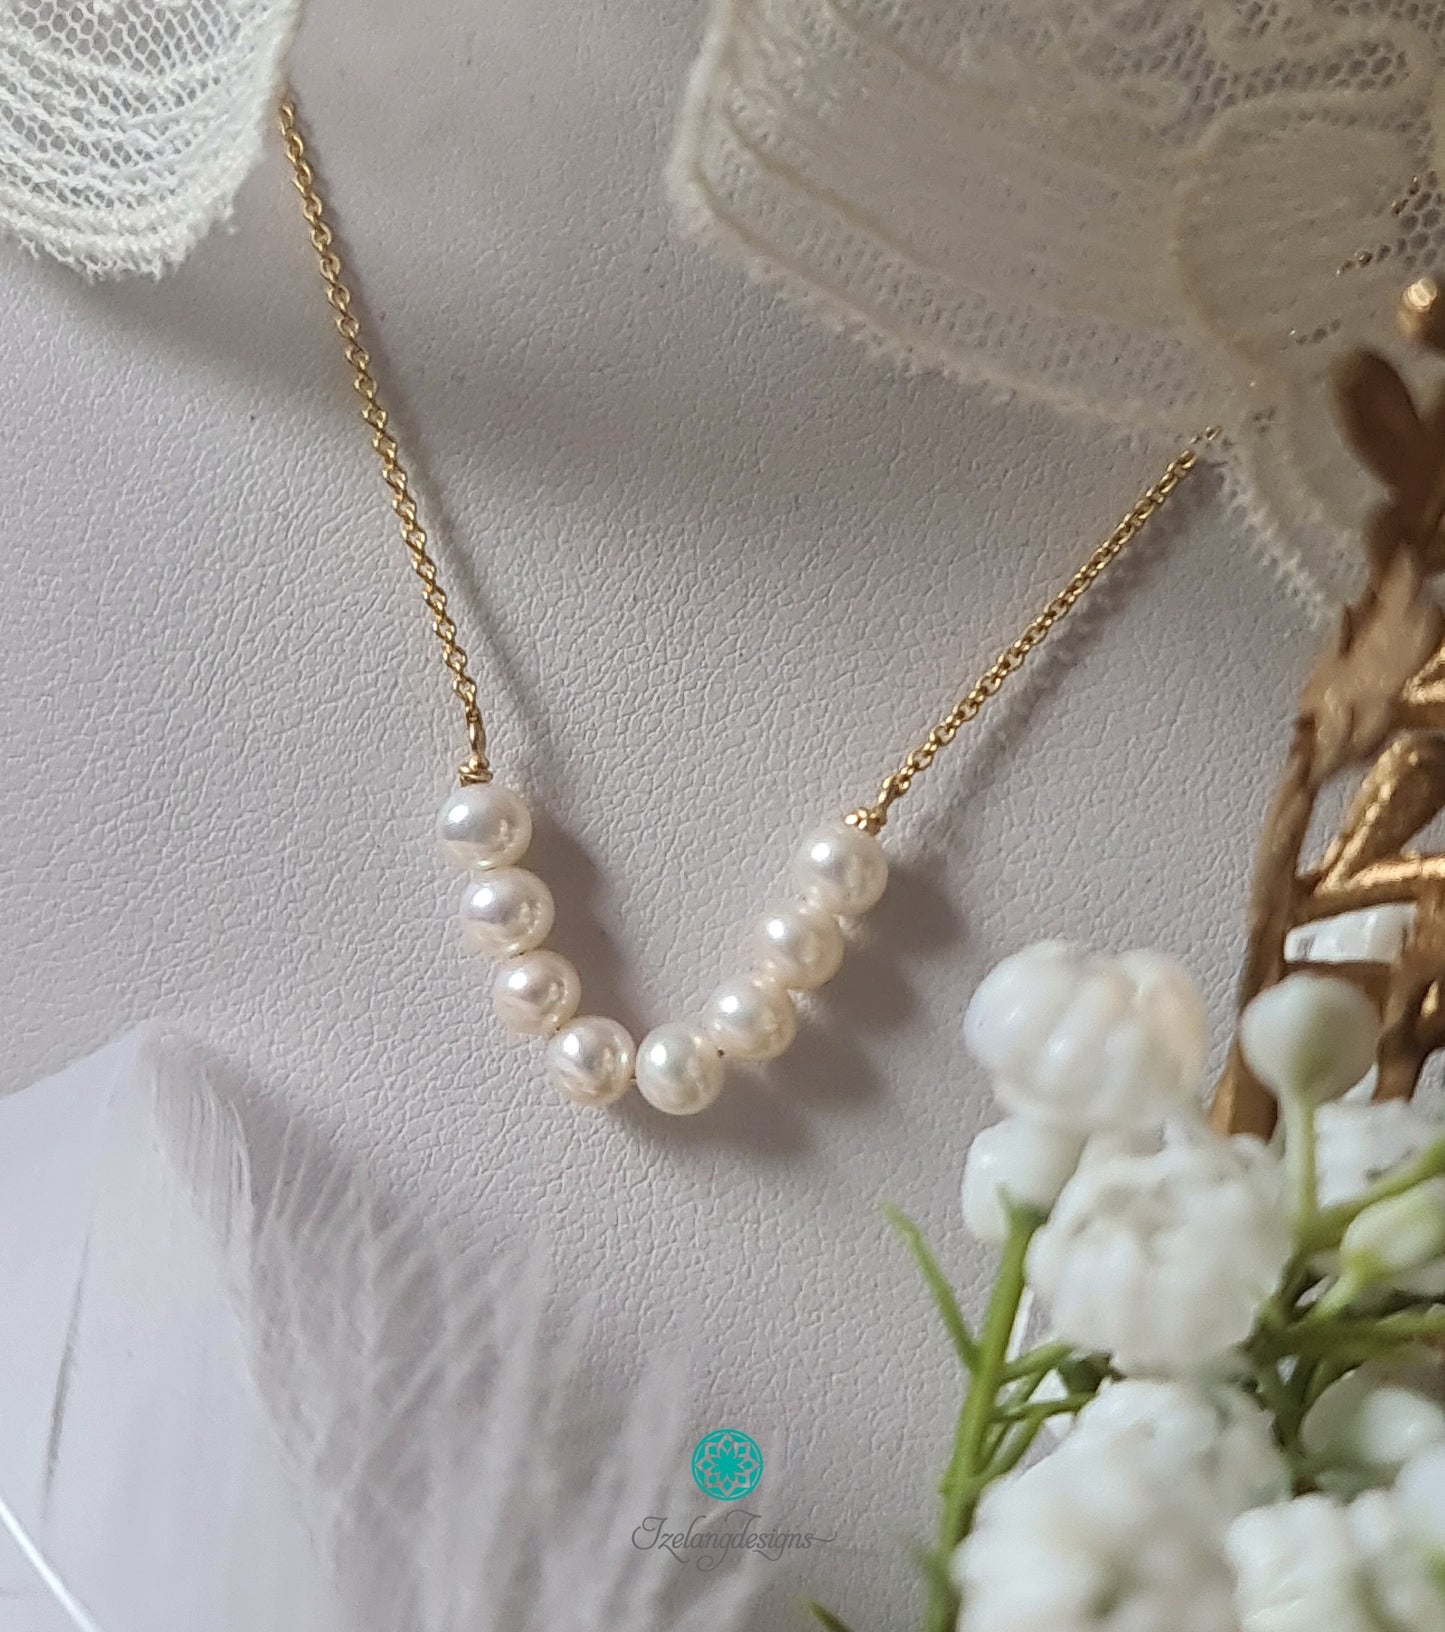 4-4.5mm Round White Freshwater Pearl V Bar Necklace in 14K Gold Filled Chain-NE350